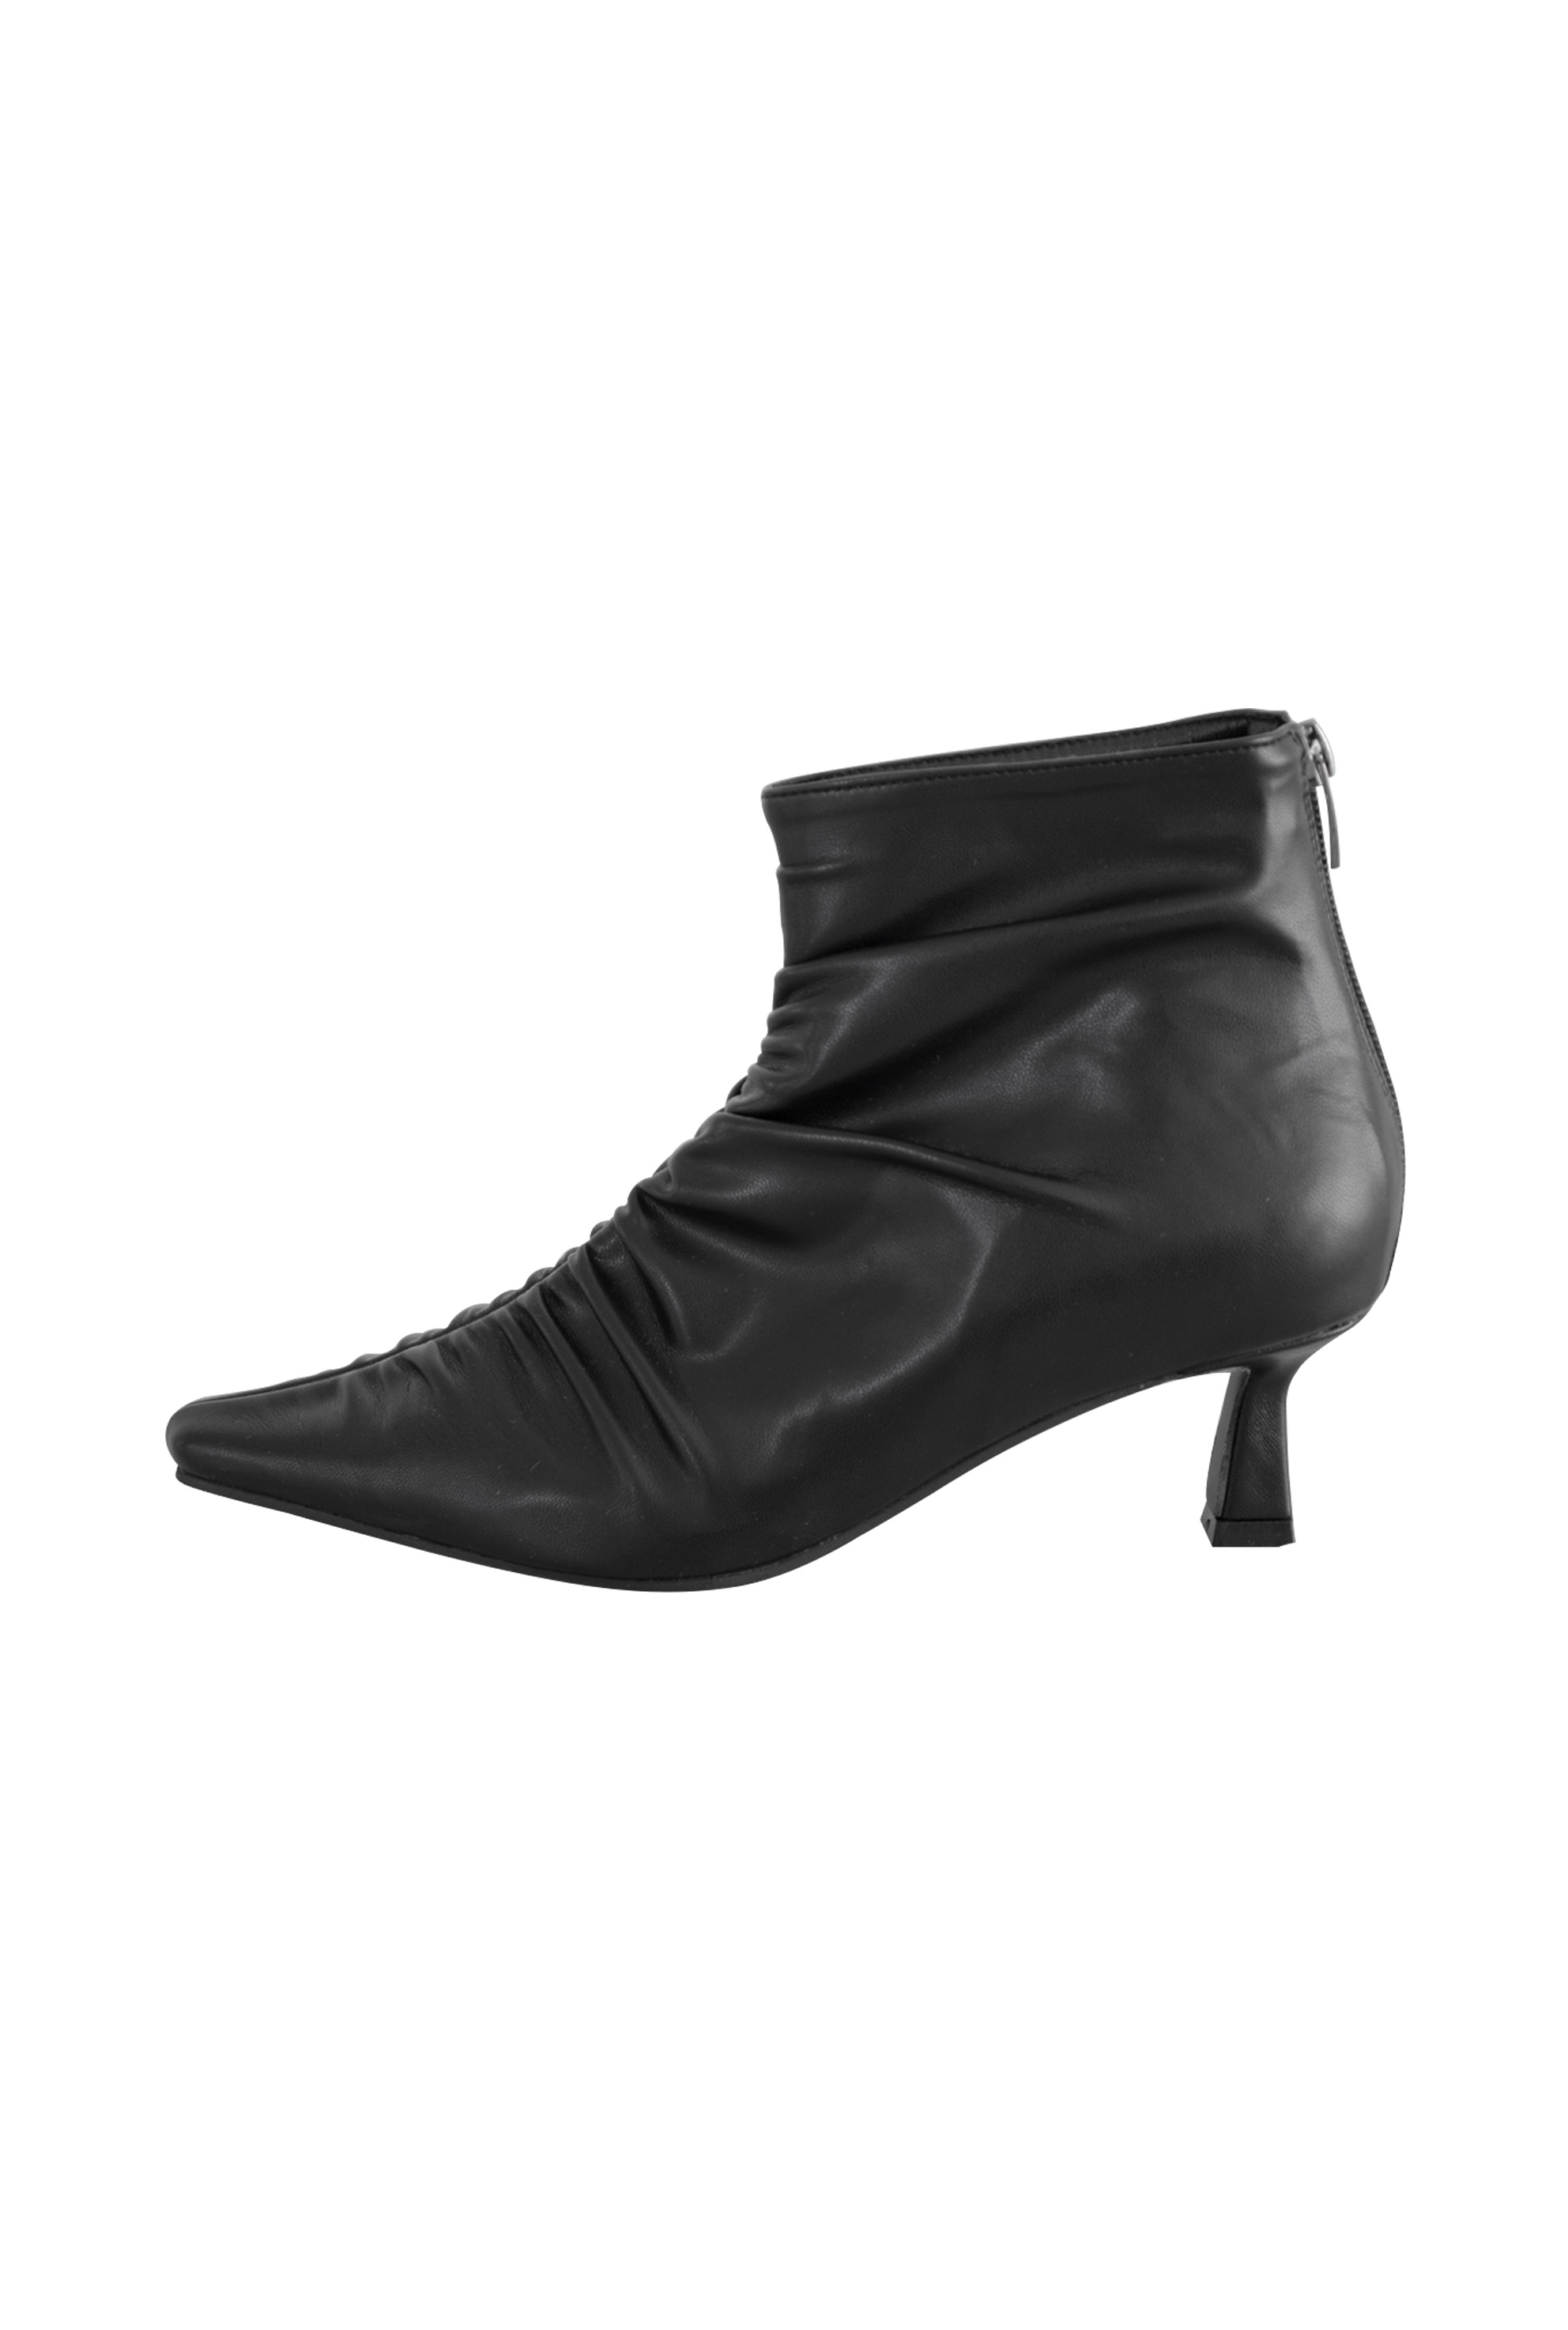 Wrinkle ankle boots